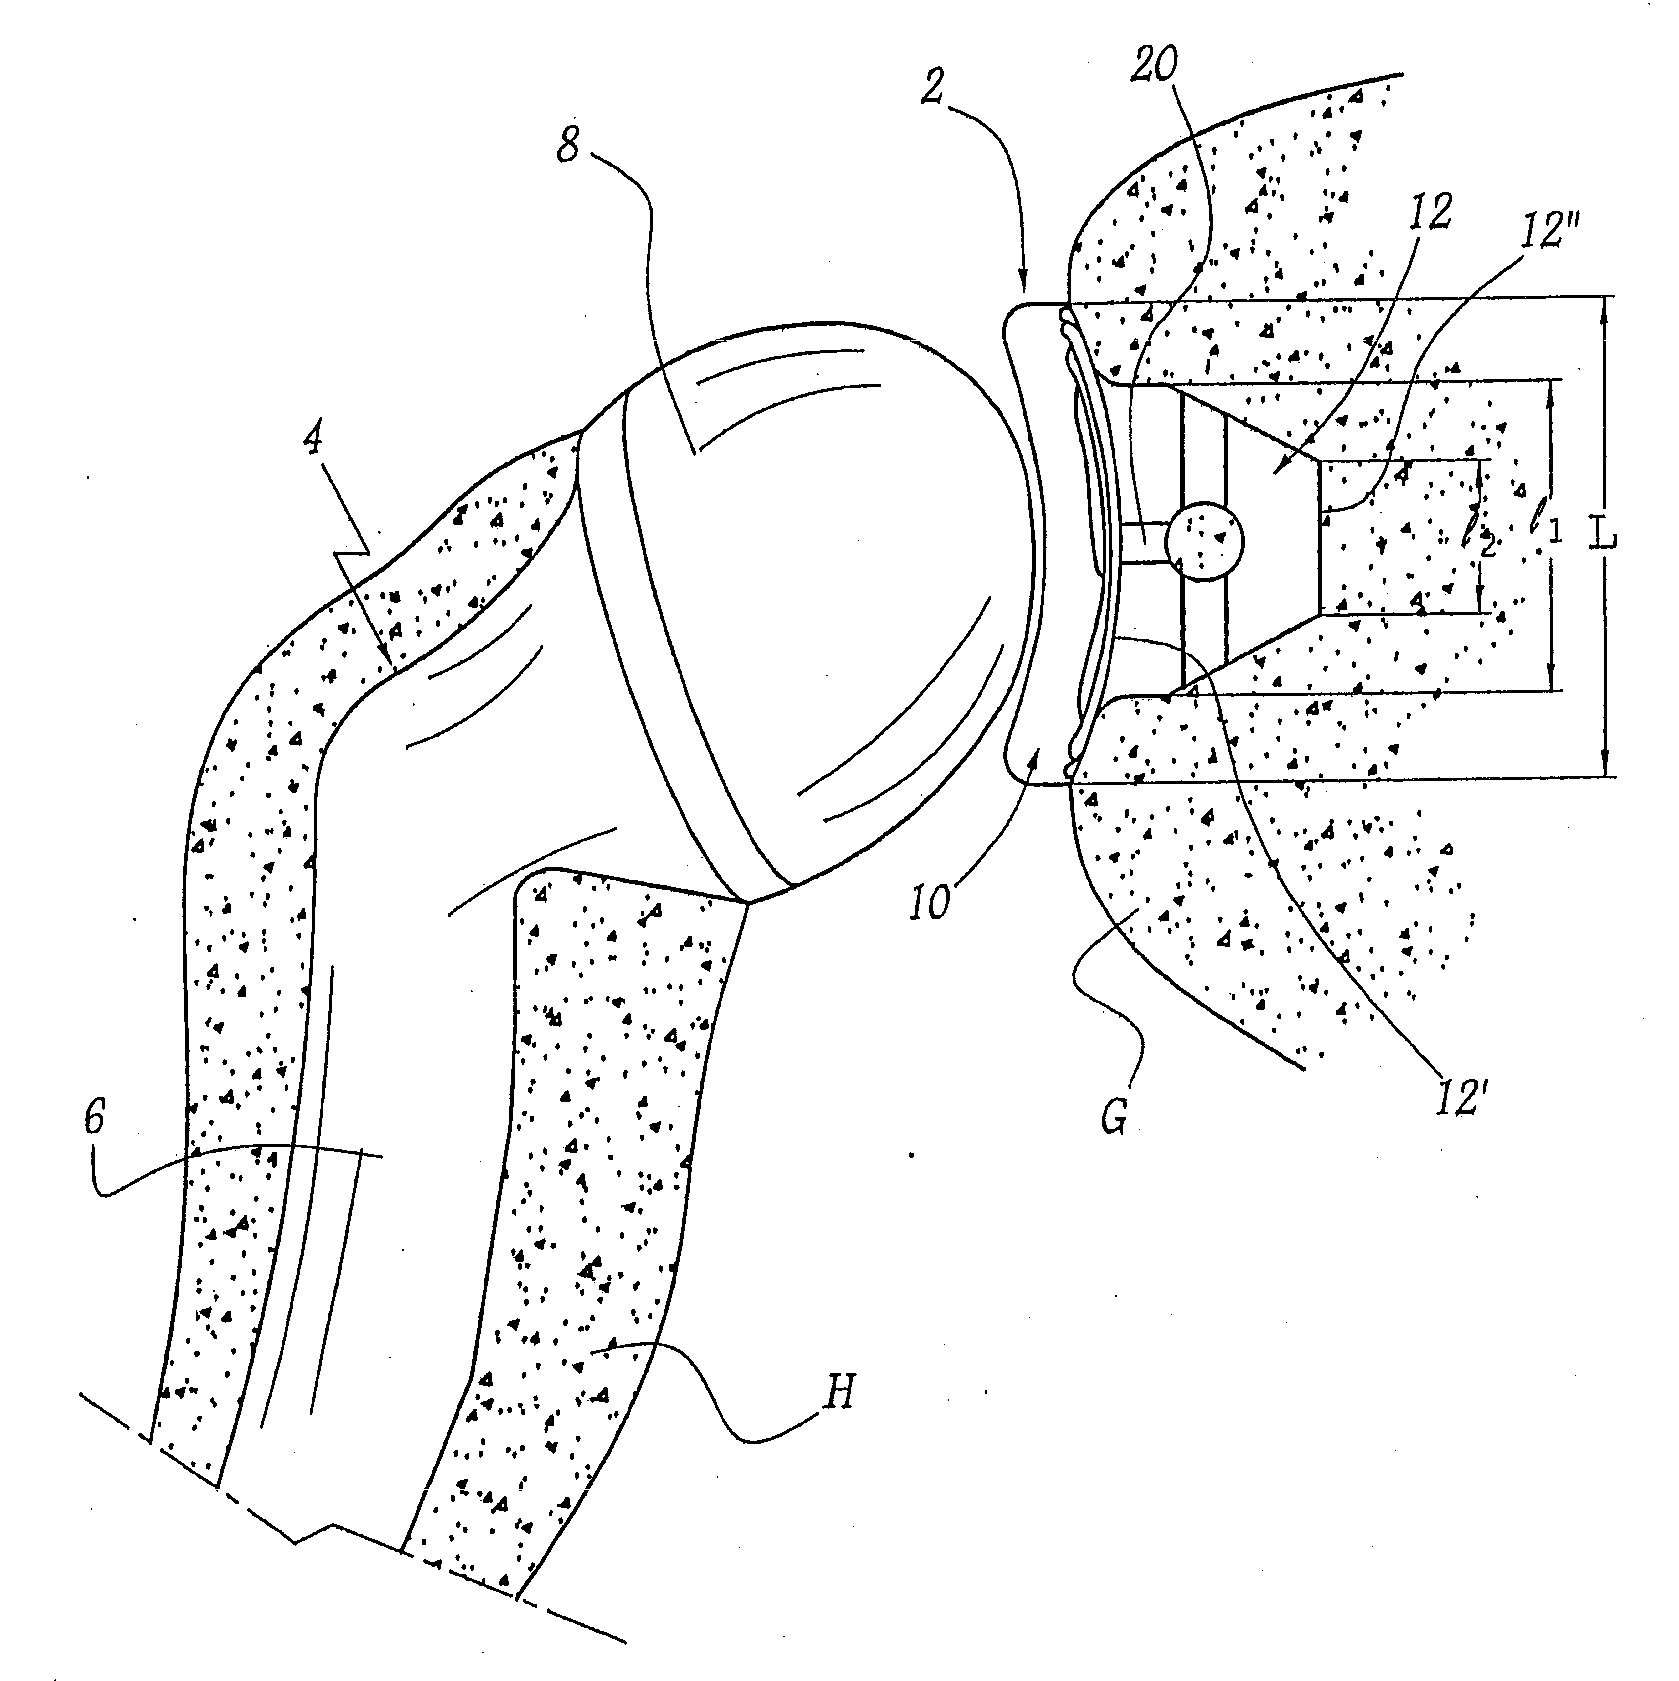 Glenoid component with an anatomically optimized keel